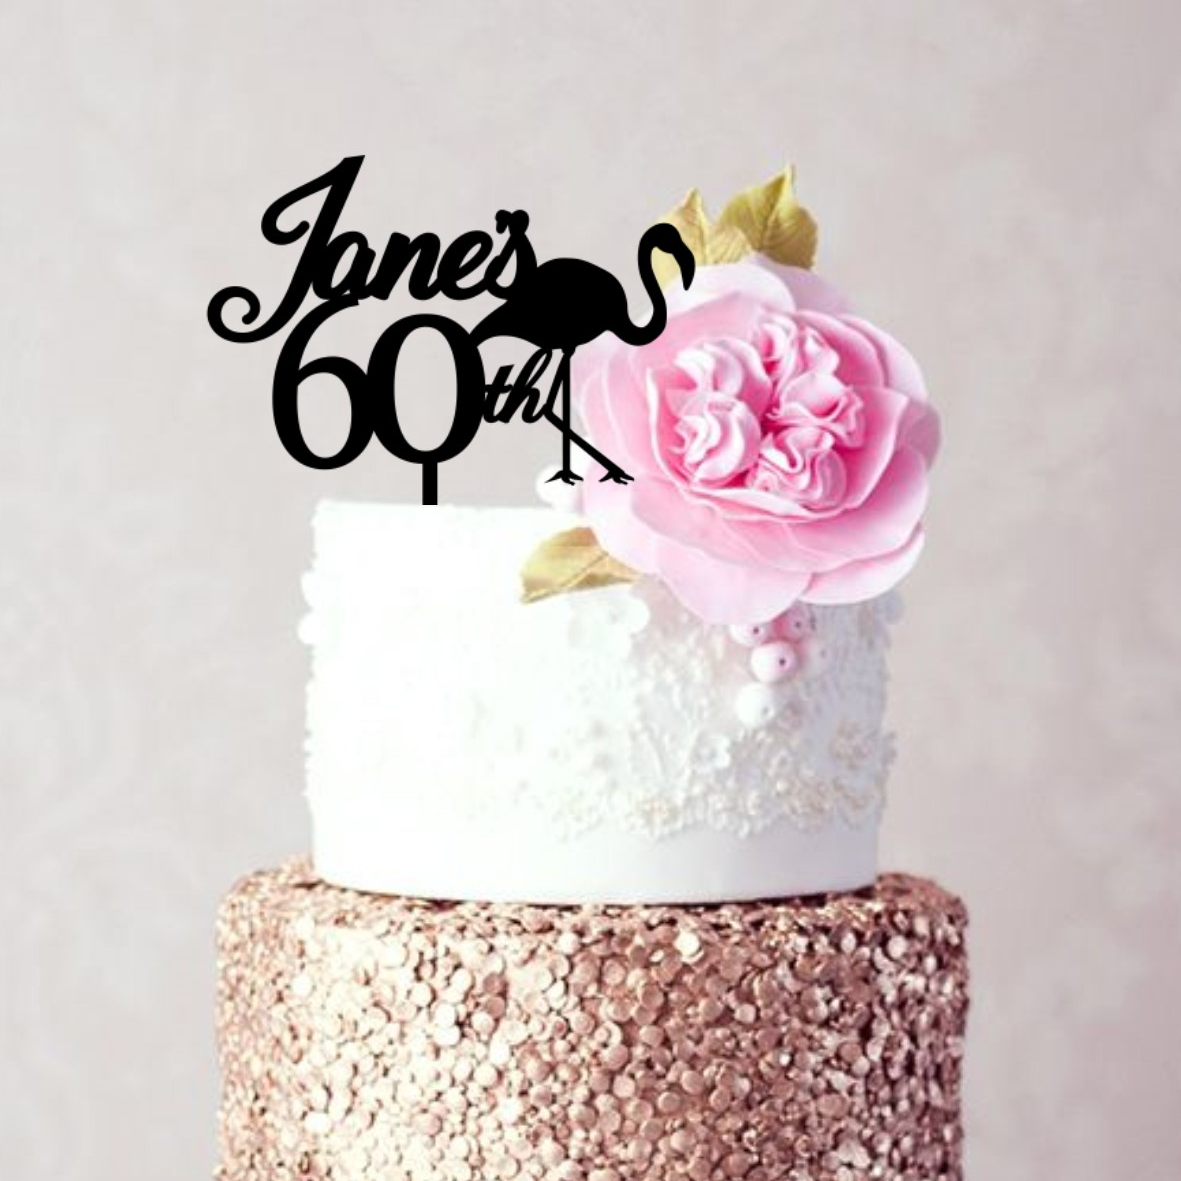 Quick Creations Cake Topper - Flamingo Jane's 60th